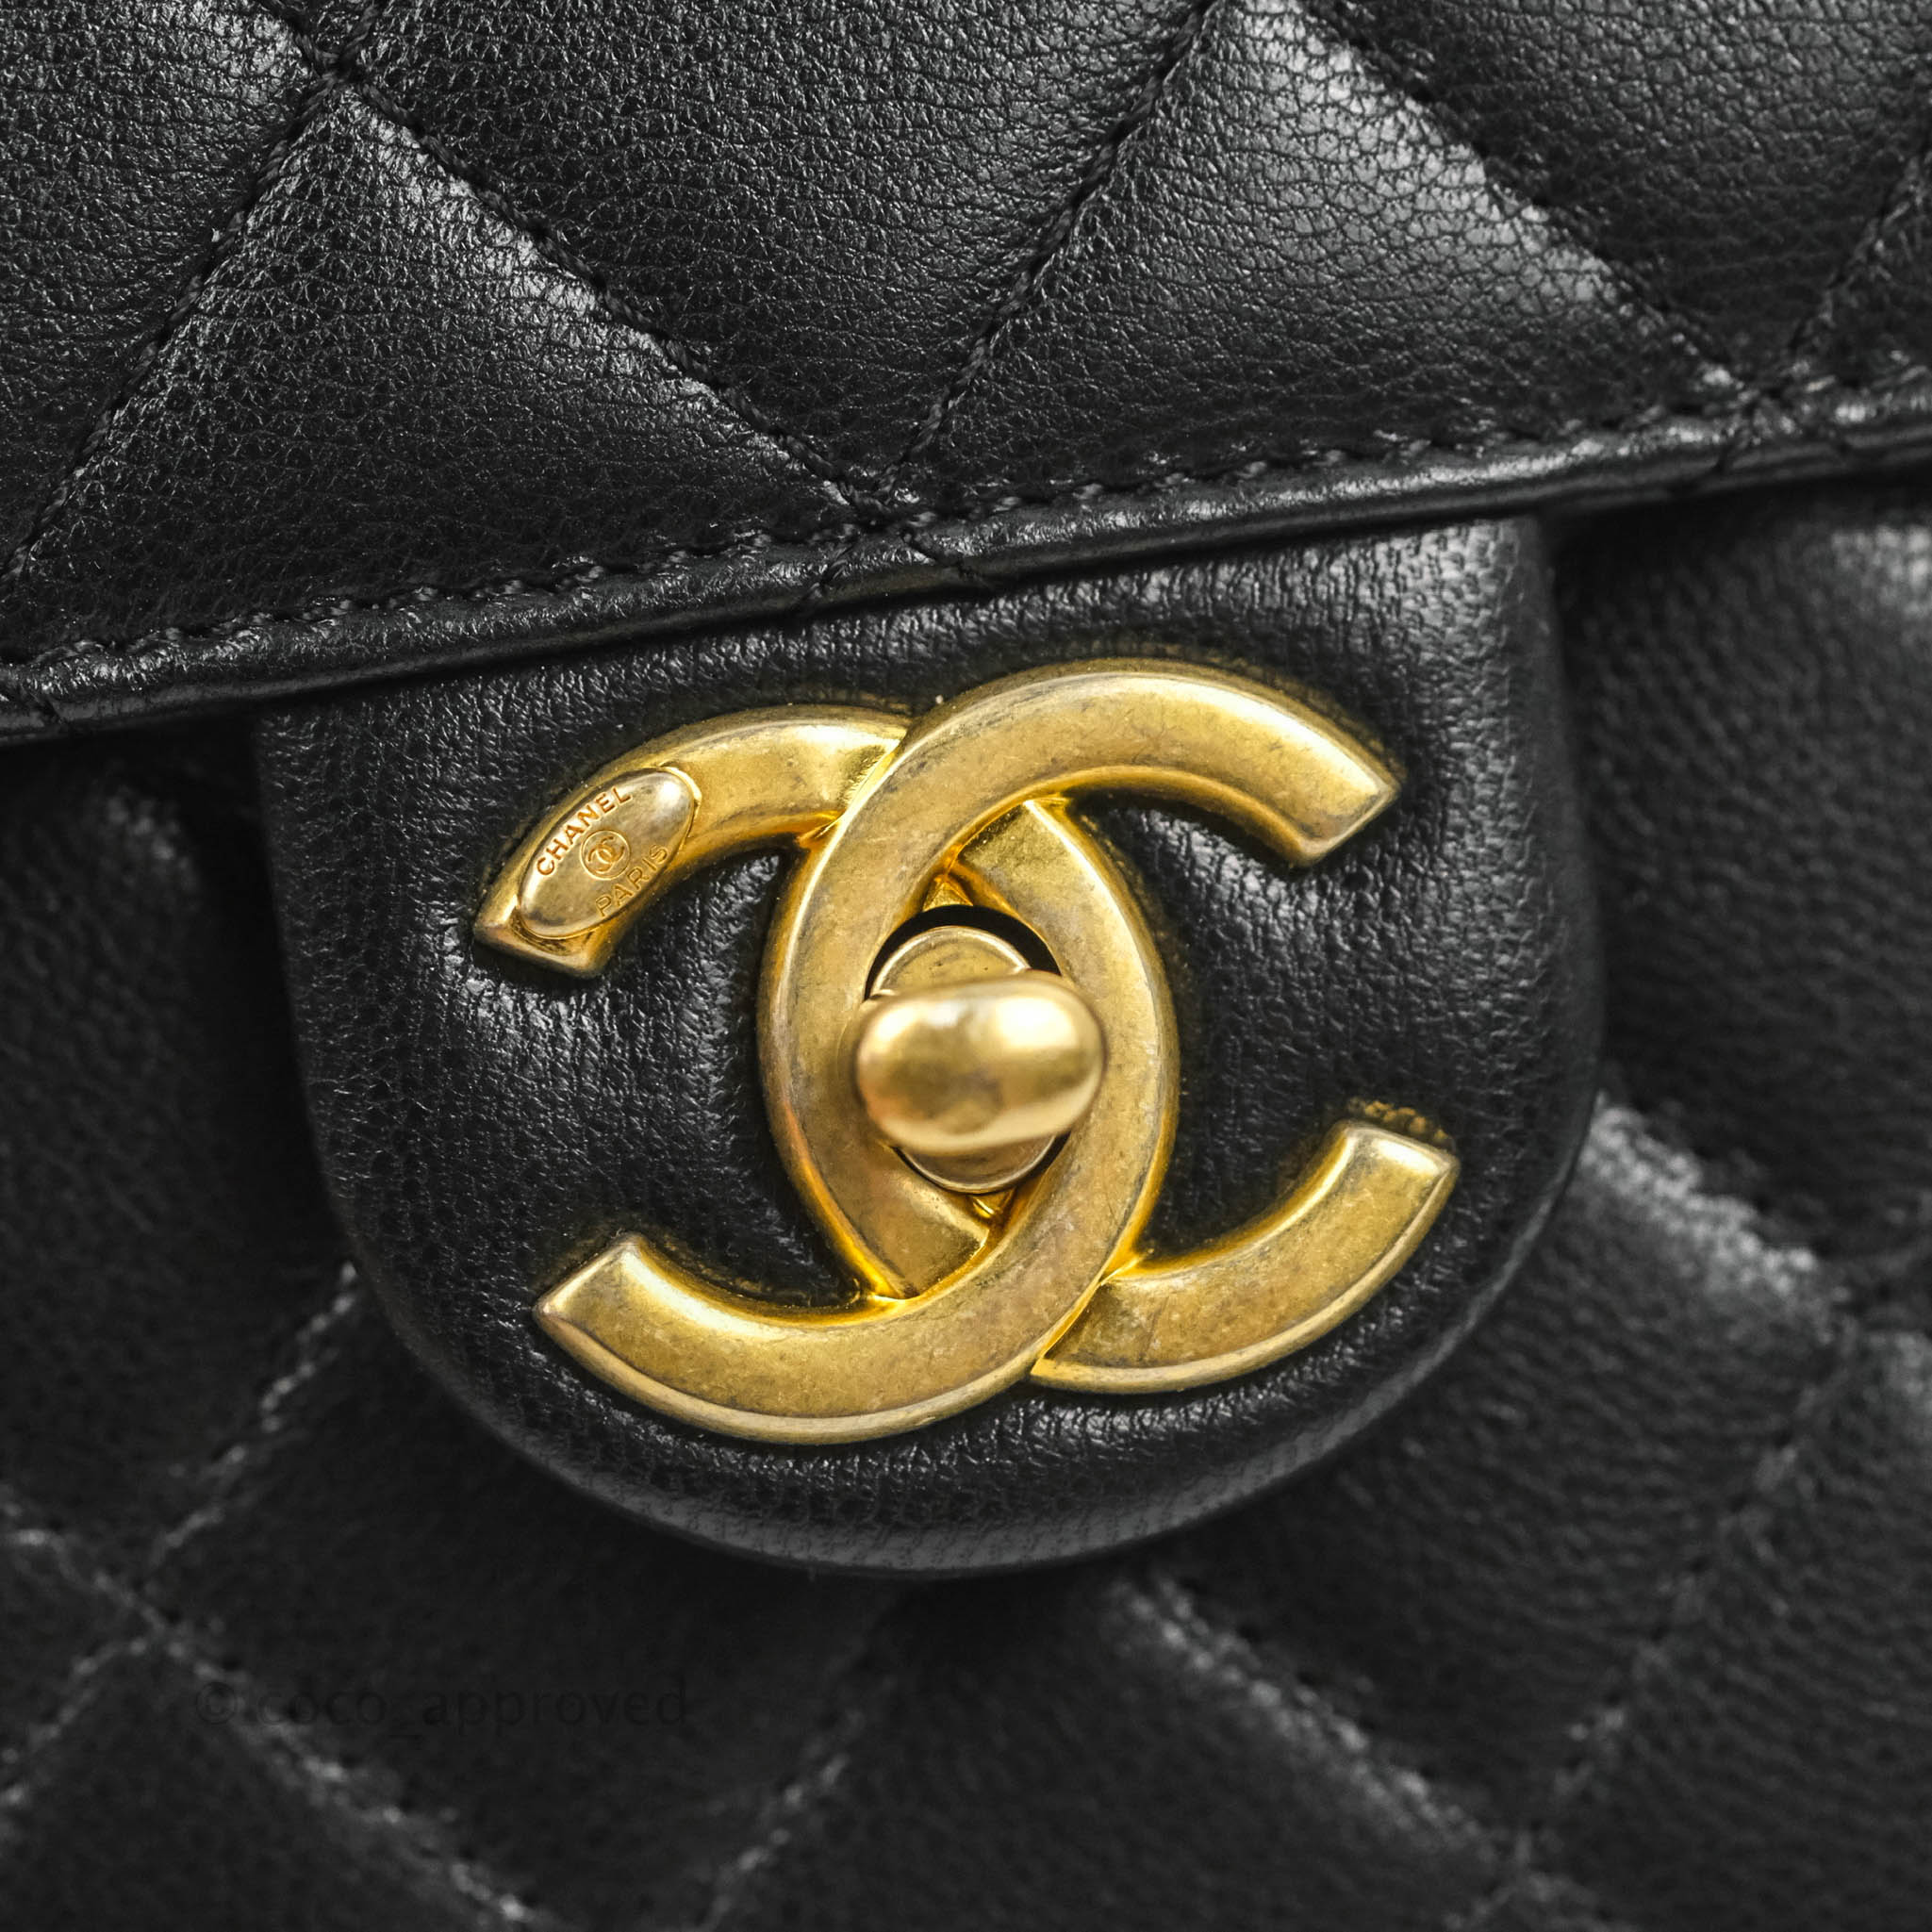 Chanel Quilted Chic Pearls Flap Black Goatskin Aged Gold Hardware